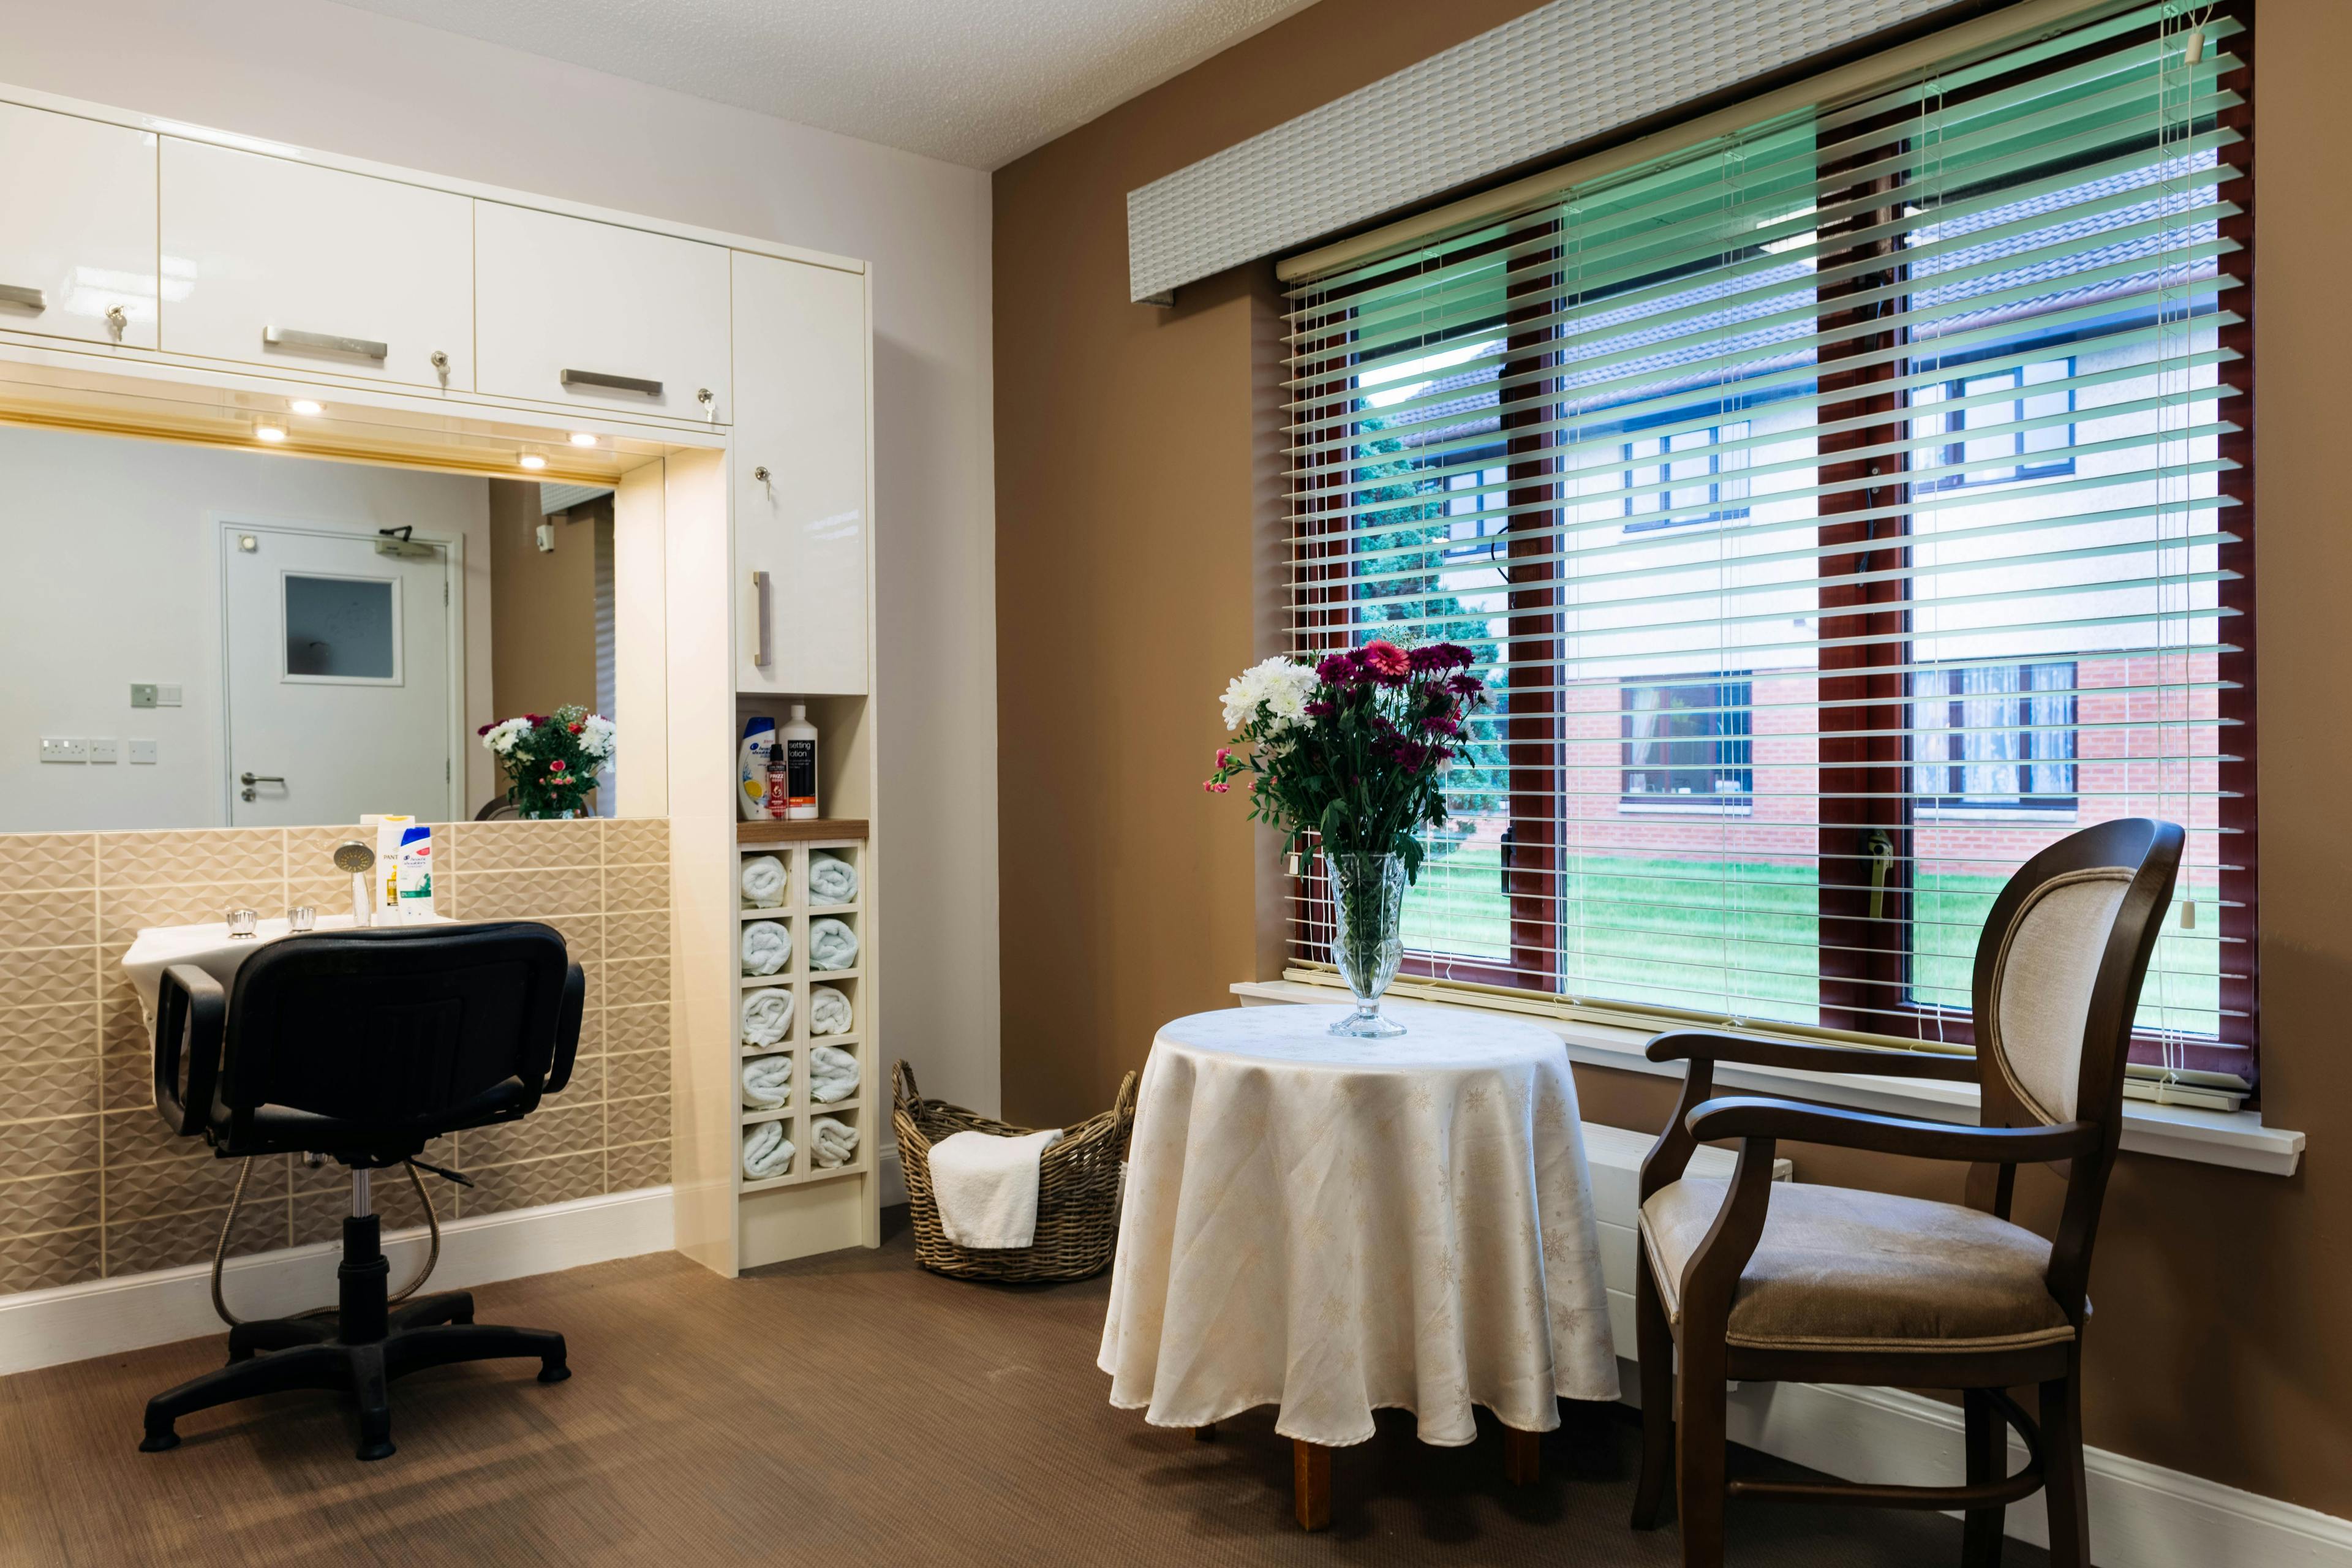 Salon at Lochduhar Care Home in Dumfries and Galloway, The Stewartry of Kirkcudbright